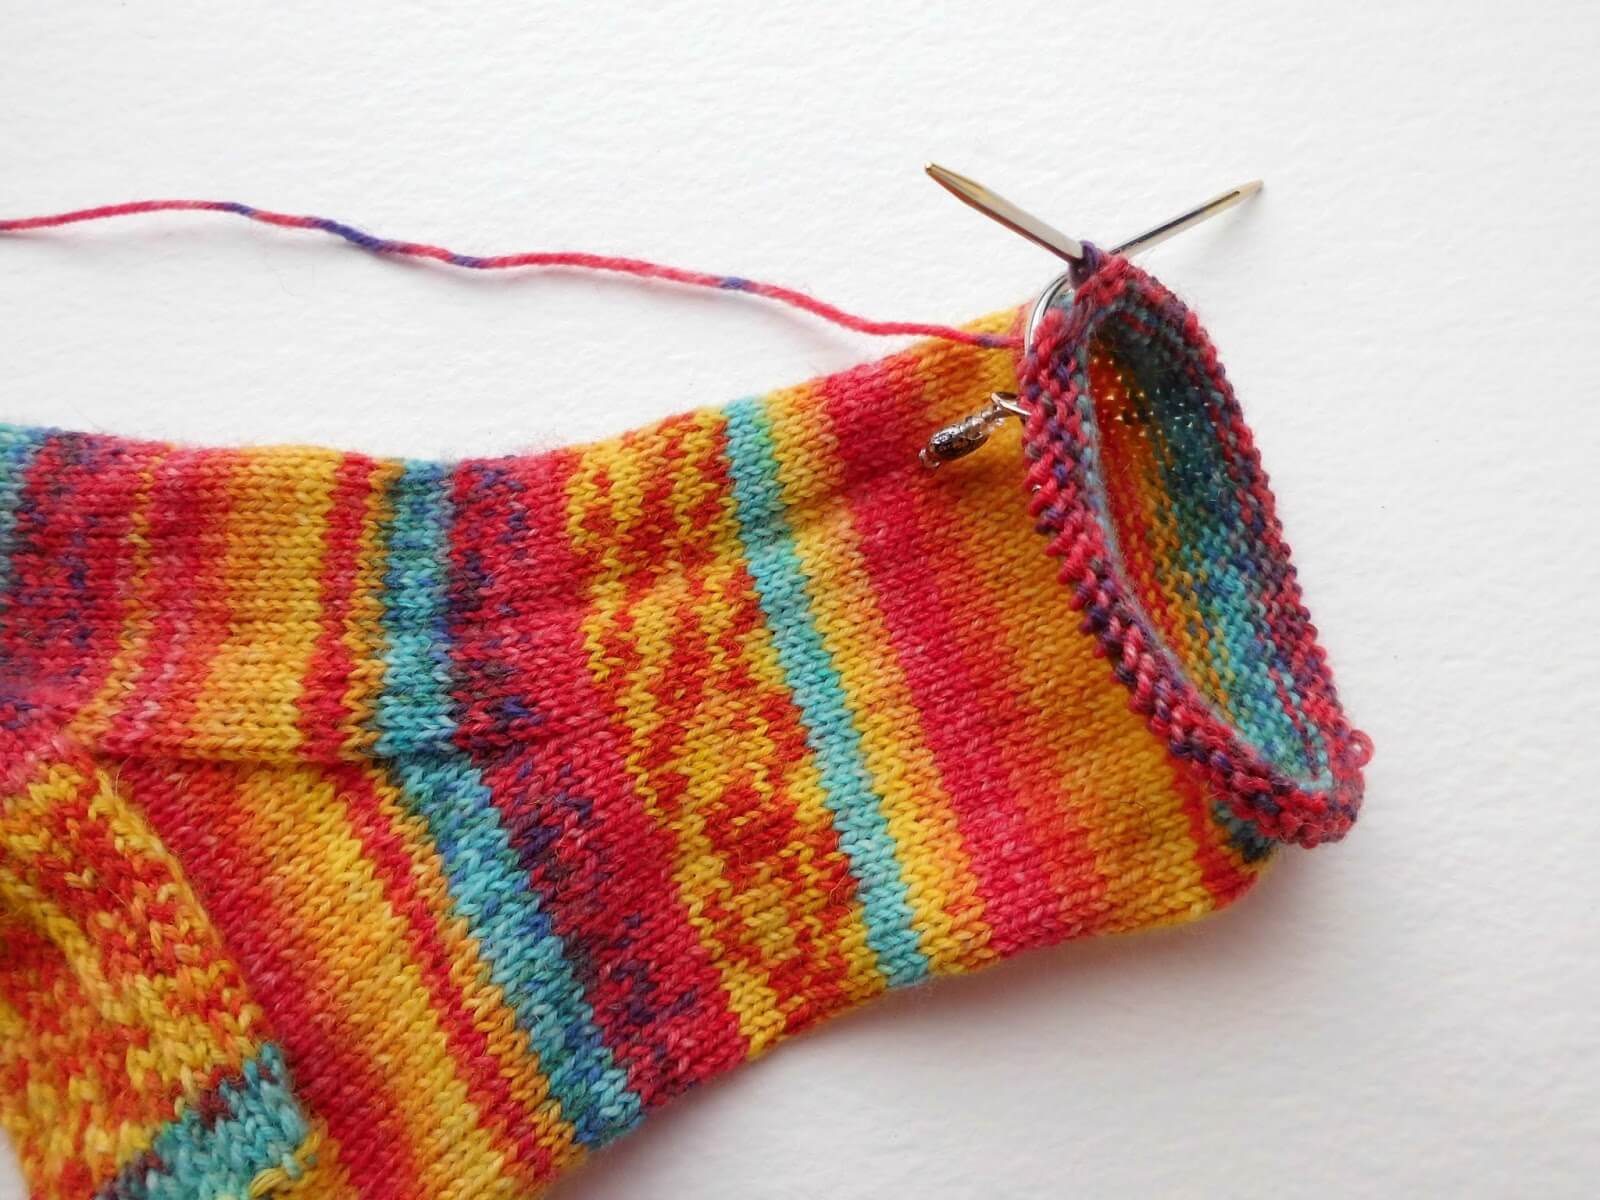 My magic formula for happiness: A Toe-up sock in self-striping